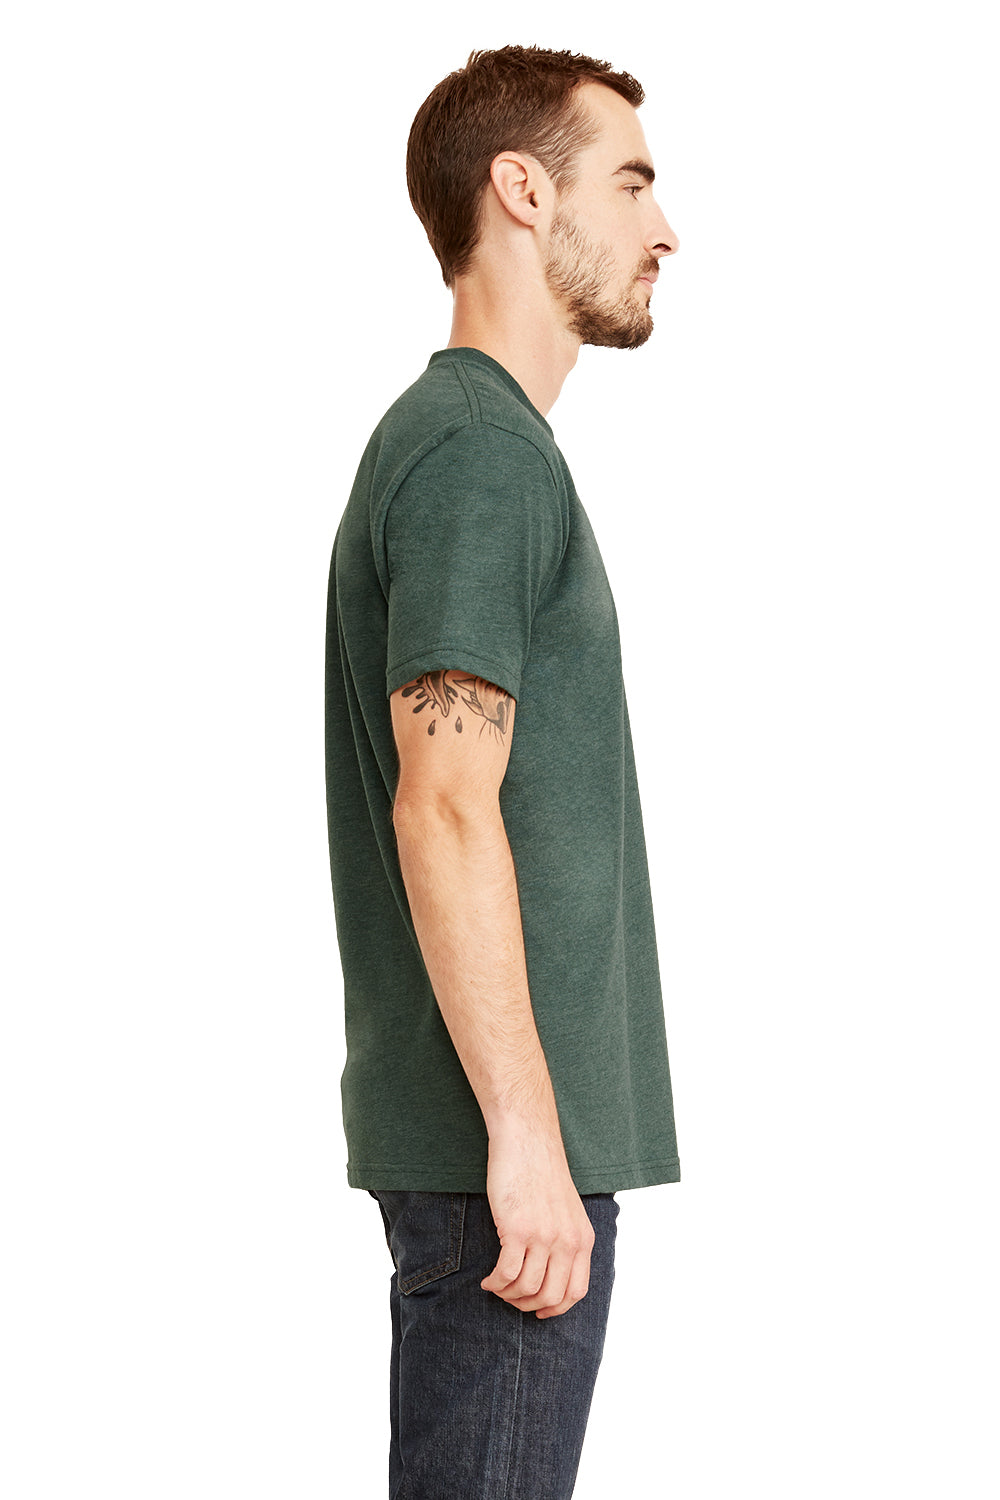 Next Level 6410 Mens Sueded Jersey Short Sleeve Crewneck T-Shirt Heather Forest Green Side